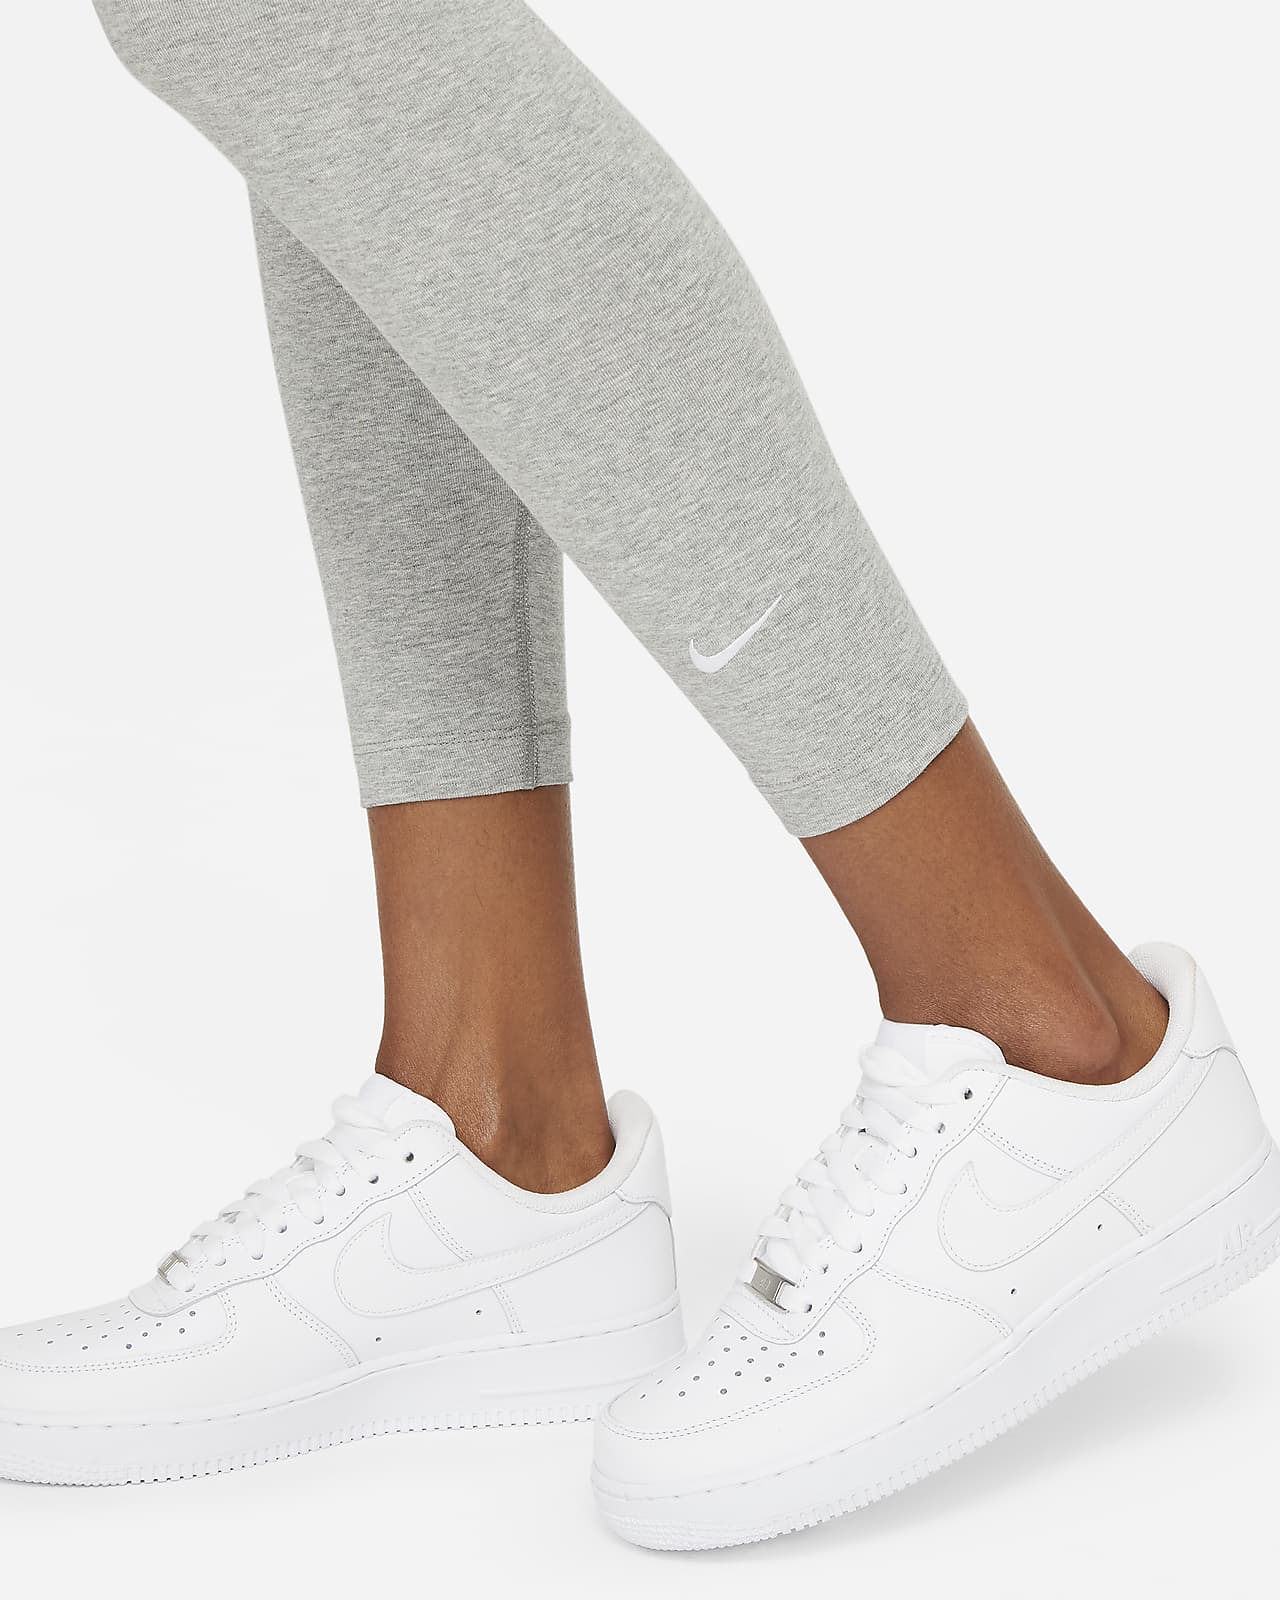 Best Pants to Wear With Nike Air Force 1s - How to Style AF1s | Catch.com.au